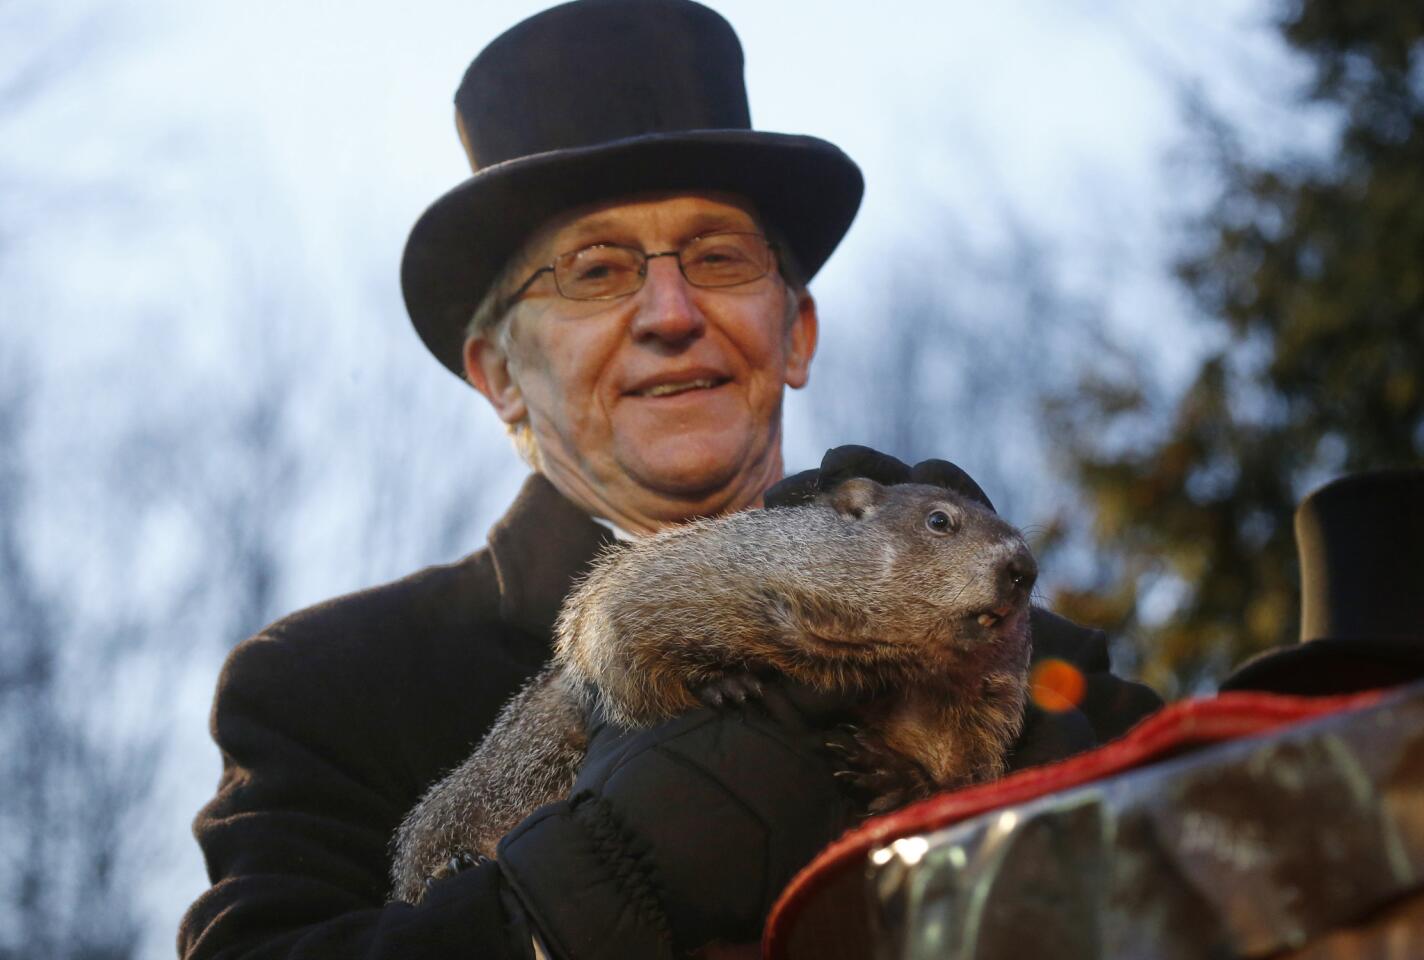 Groundhog Club co-handler Ron Ploucha holds Punxsutawney Phil during the annual celebration of Groundhog Day on Gobbler's Knob in Punxsutawney, Pa., Tuesday, Feb. 2, 2016. The handlers say the furry rodent has failed to see his shadow, meaning he's "predicted" an early spring.